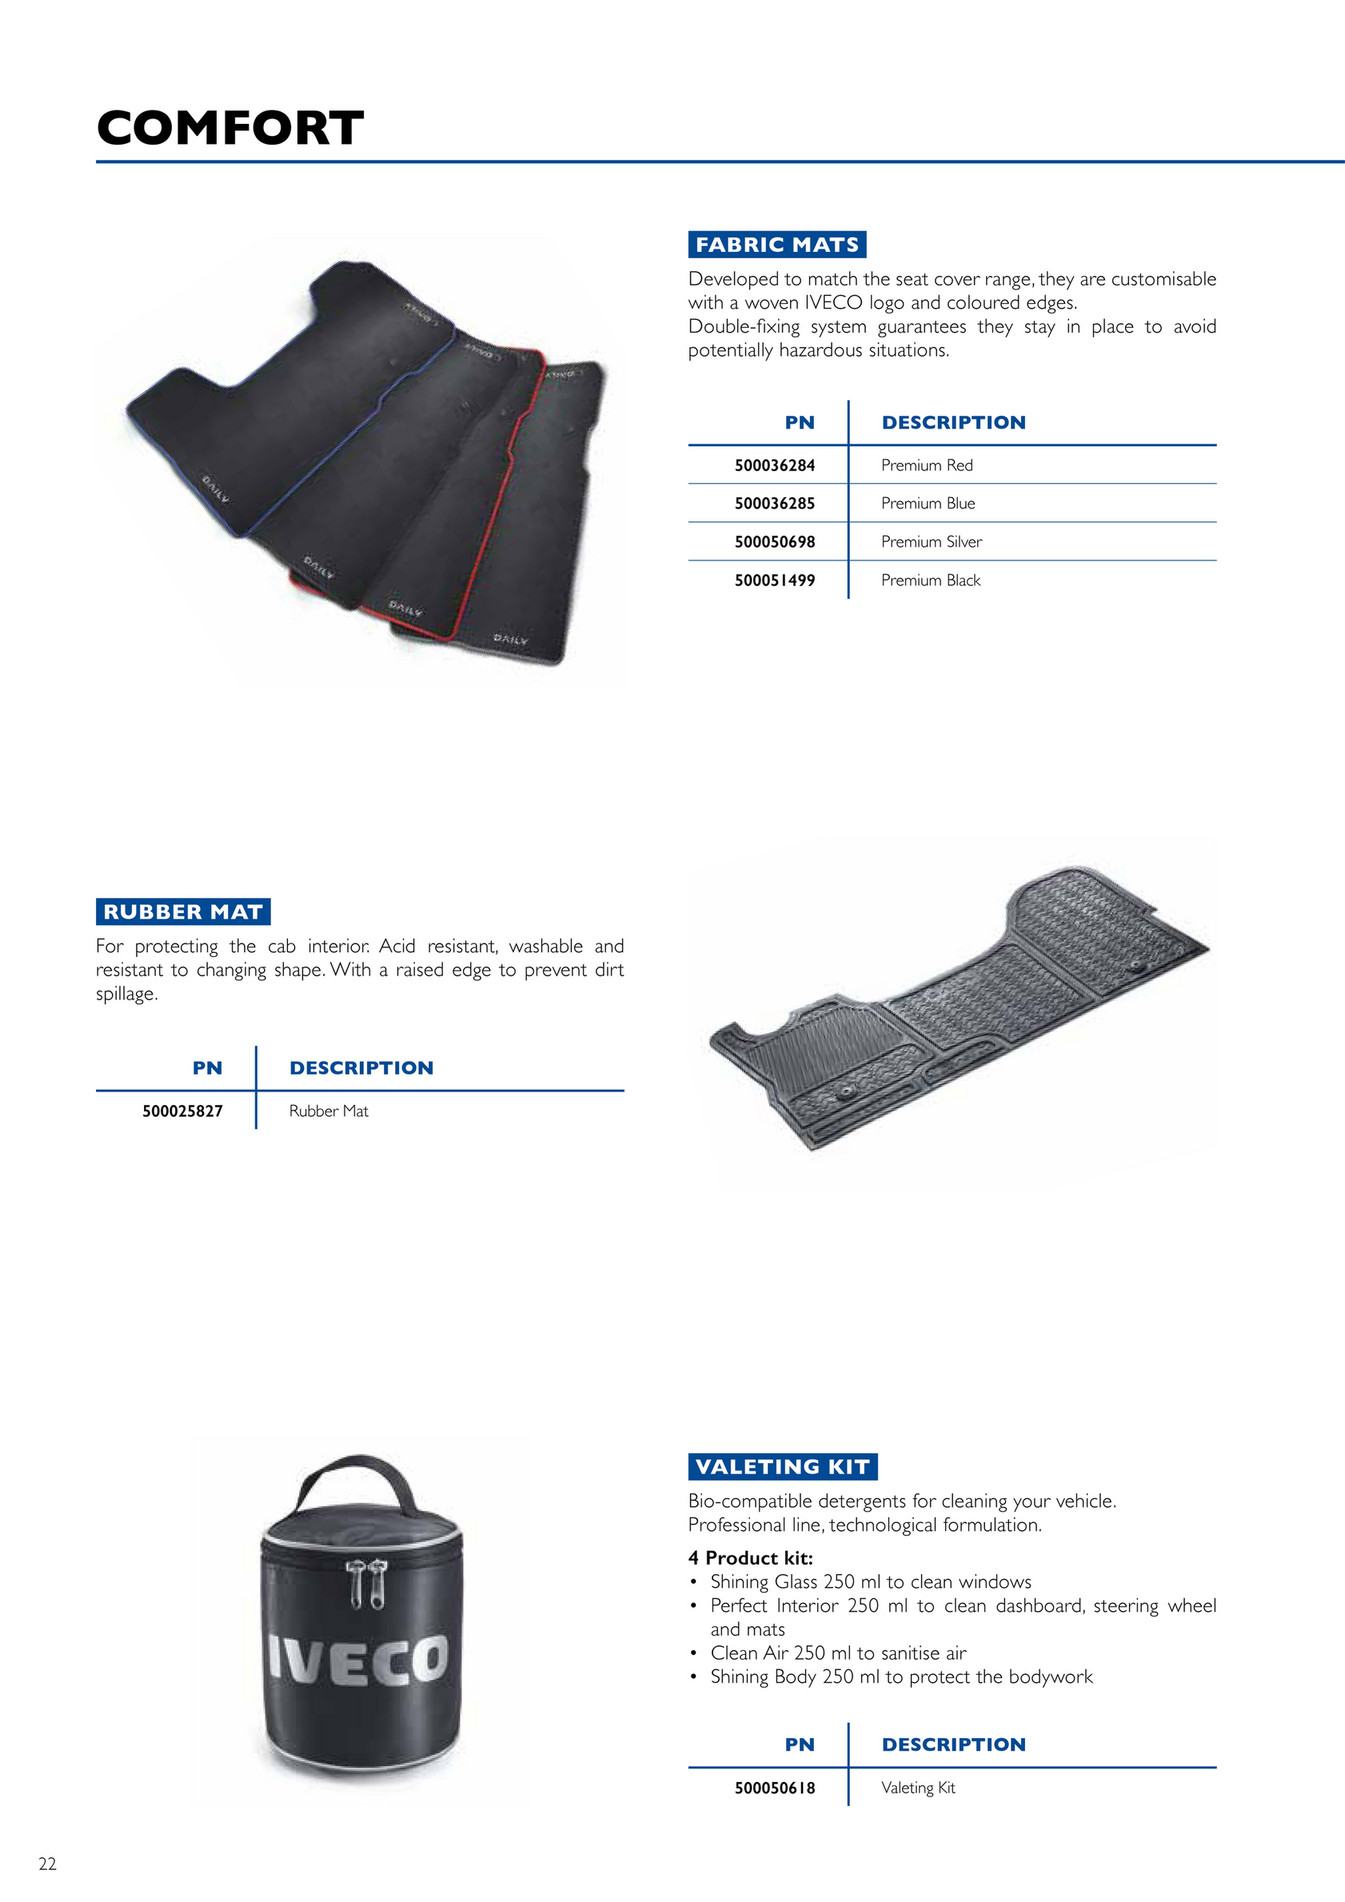 22-23 2019 - CATALOGUE with Created (EN) - Daily IVECO New - Page ACCESSORIES